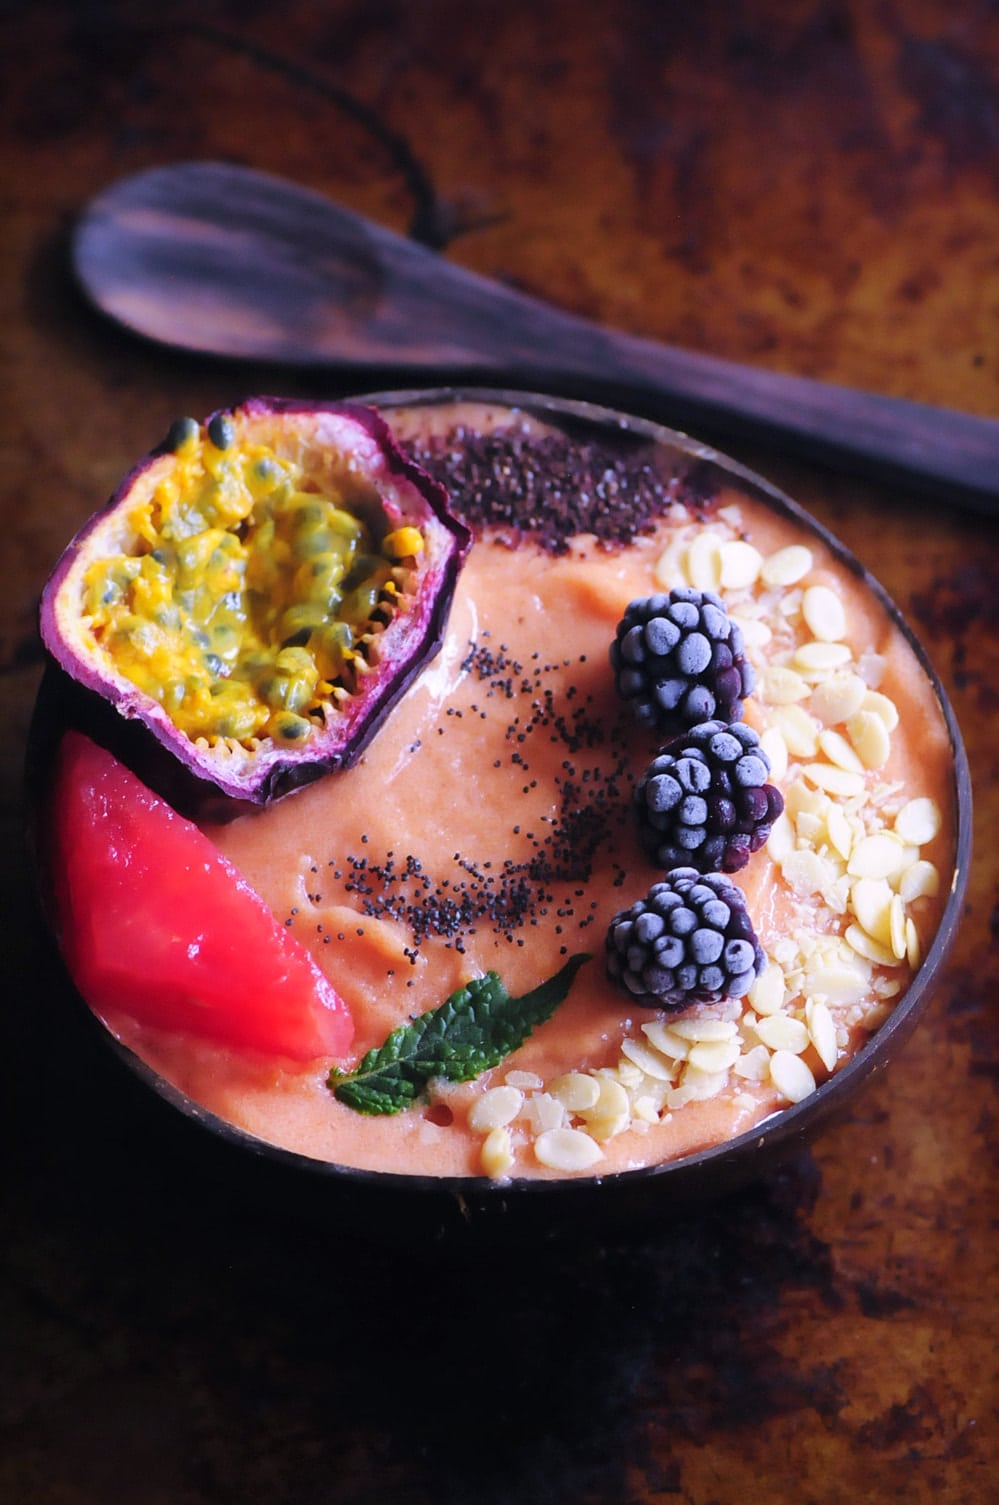  A creamy, refreshing, healthy, easy and TASTY Papaya Watermelon Nice Cream Smoothie Bowl ripe for the toppings of your choice! Gluten-free & Vegan. #papayasmoothiebowl #watermelonsmoothie #nicecream #vegansmoothiebowl #pinksmoothiebowl #papayawatermelon #watermelonnicecream 